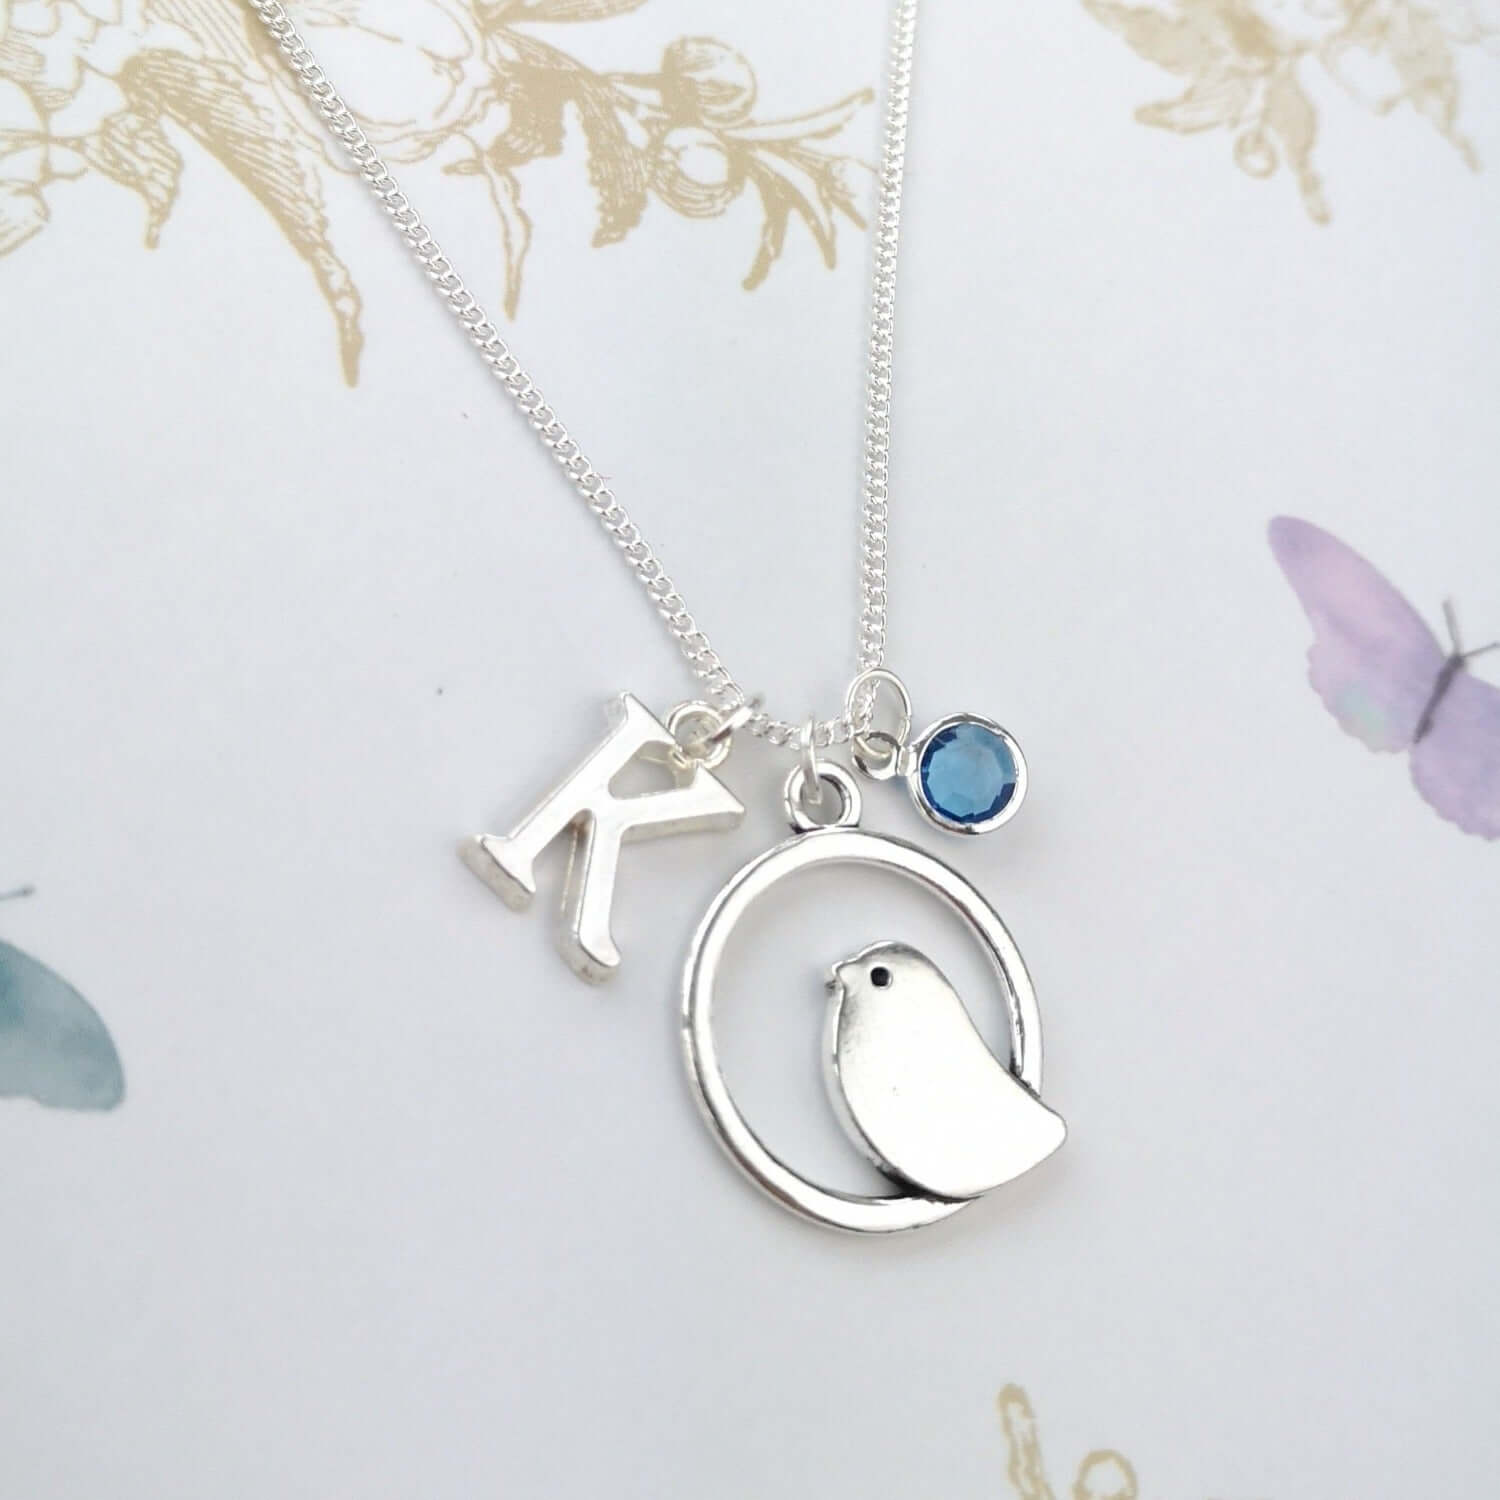 Personalised bird necklace